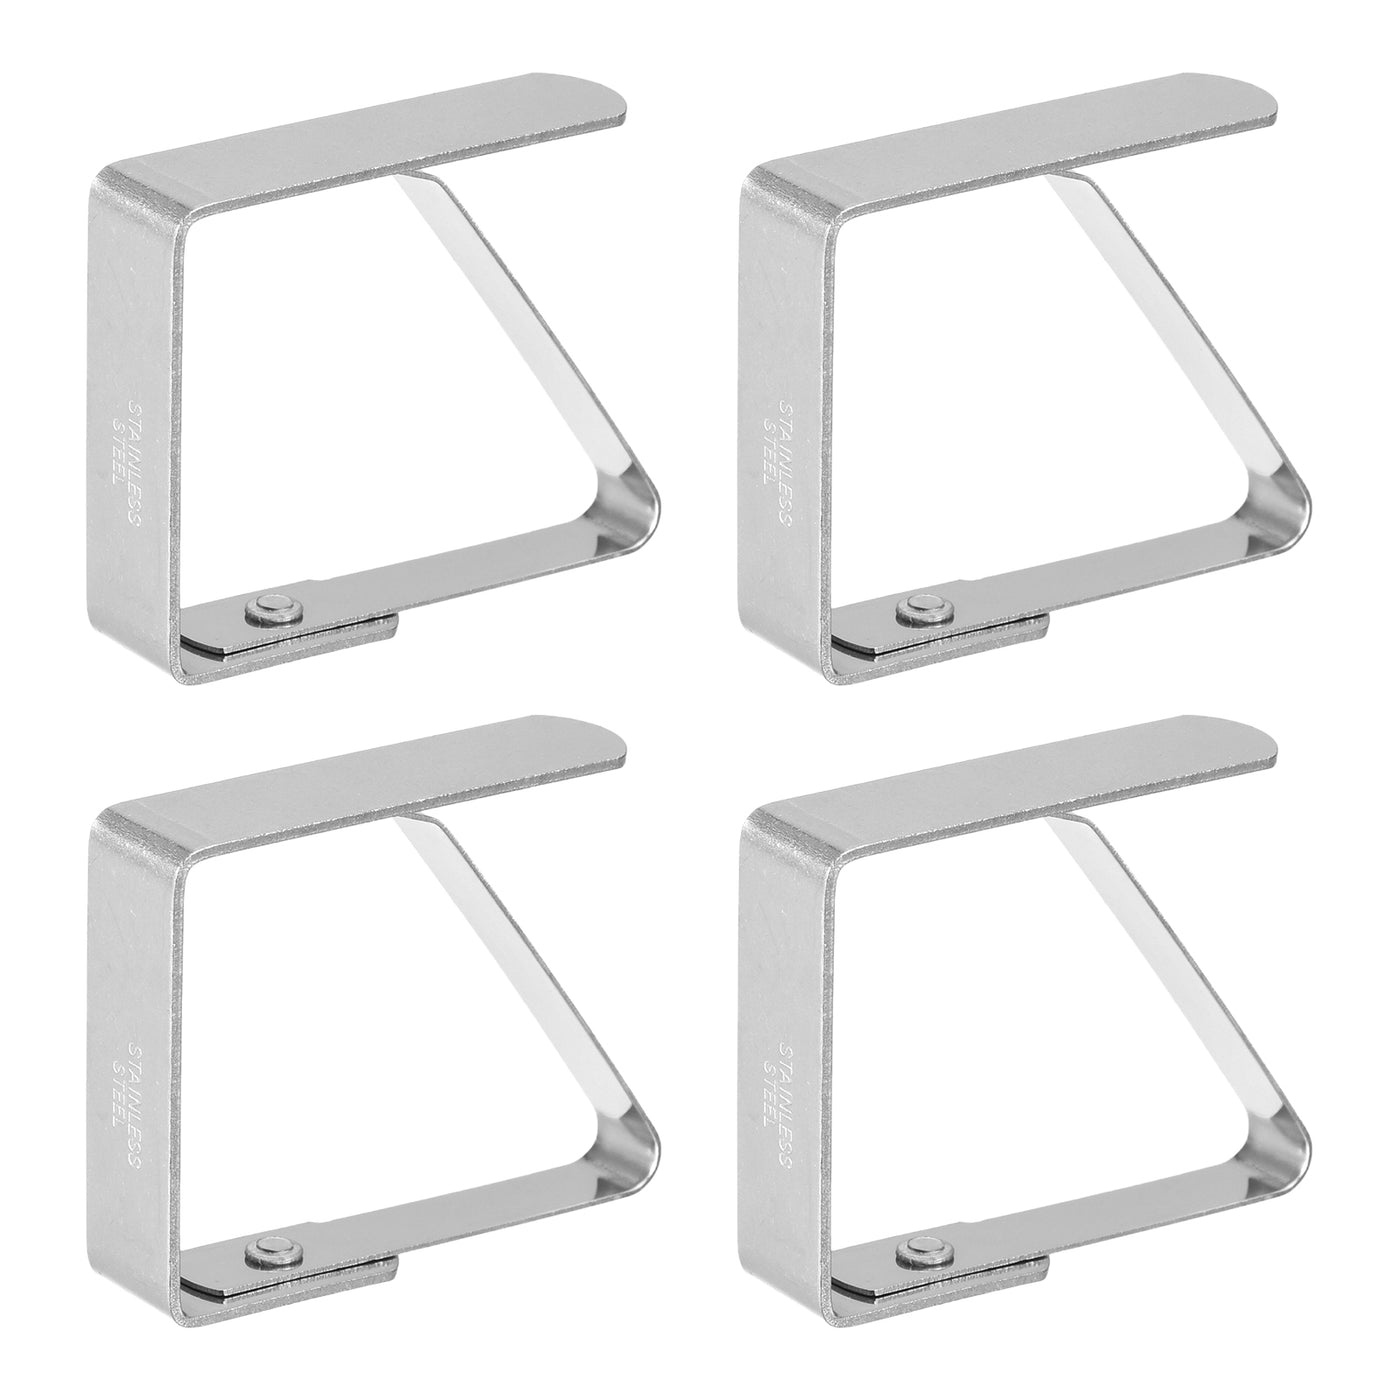 uxcell Uxcell Tablecloth Clips 50mm x 40mm 430 Stainless Steel Table Cloth Holder Silver 4 Pcs